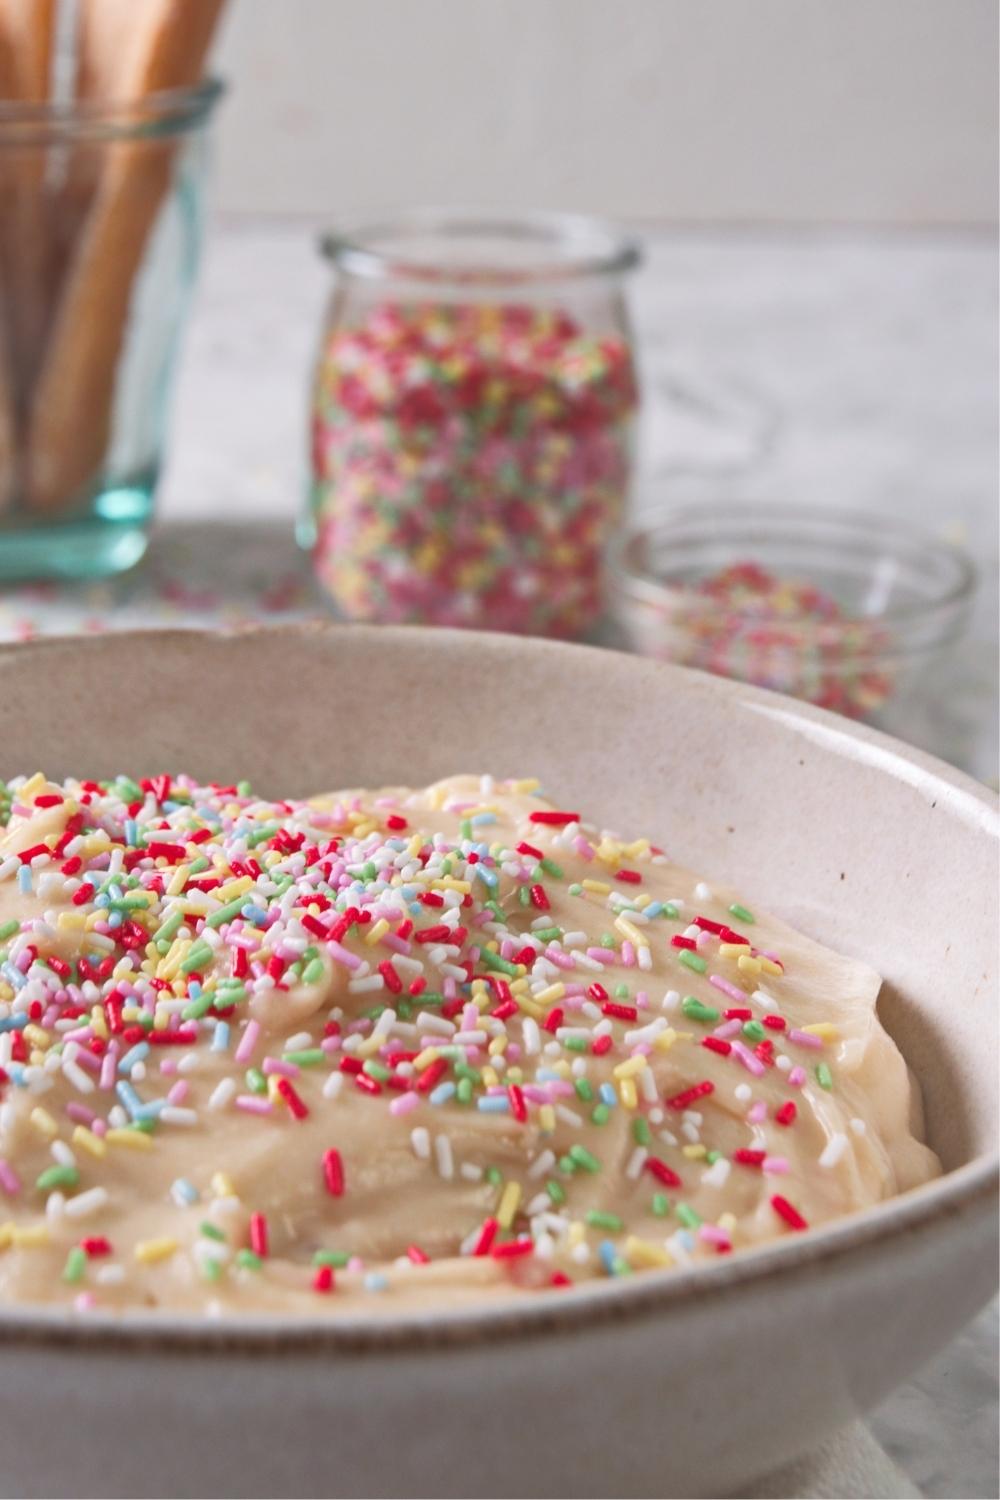 A close-up of a serving bowl containing homemade dunkaroo dip topped with rainbow sprinkles.